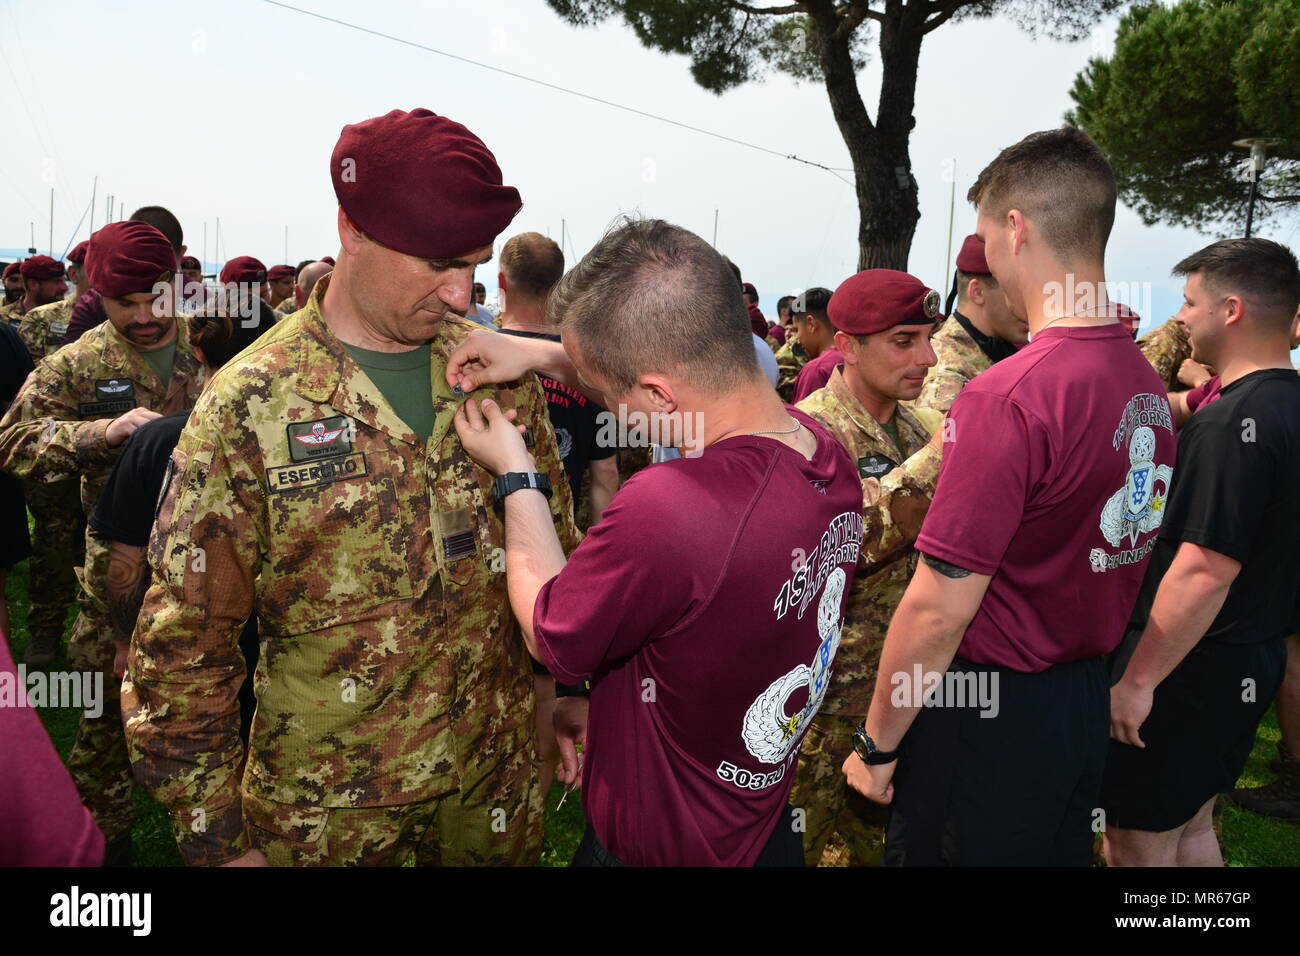 U.S. Army Paratroopers assigned to 1st Battalion, 503rd Infantry Regiment, 173rd Airborne Brigade, Italian Army Paratroopers from the 4th Regimento Paracadutisti Alpini and the Brigata Folgore exchange airborne wings after a water jump into Lake Garda near Pacengo, Italy, May 18, 2017. The event highlighted combined NATO airborne operations between the brigade and its host nation allies. The 173rd Airborne Brigade is the U.S. Army Contingency Response Force in Europe, capable of projecting ready forces anywhere in the U.S. European, Africa or Central Commands' areas of responsibility within 18 Stock Photo